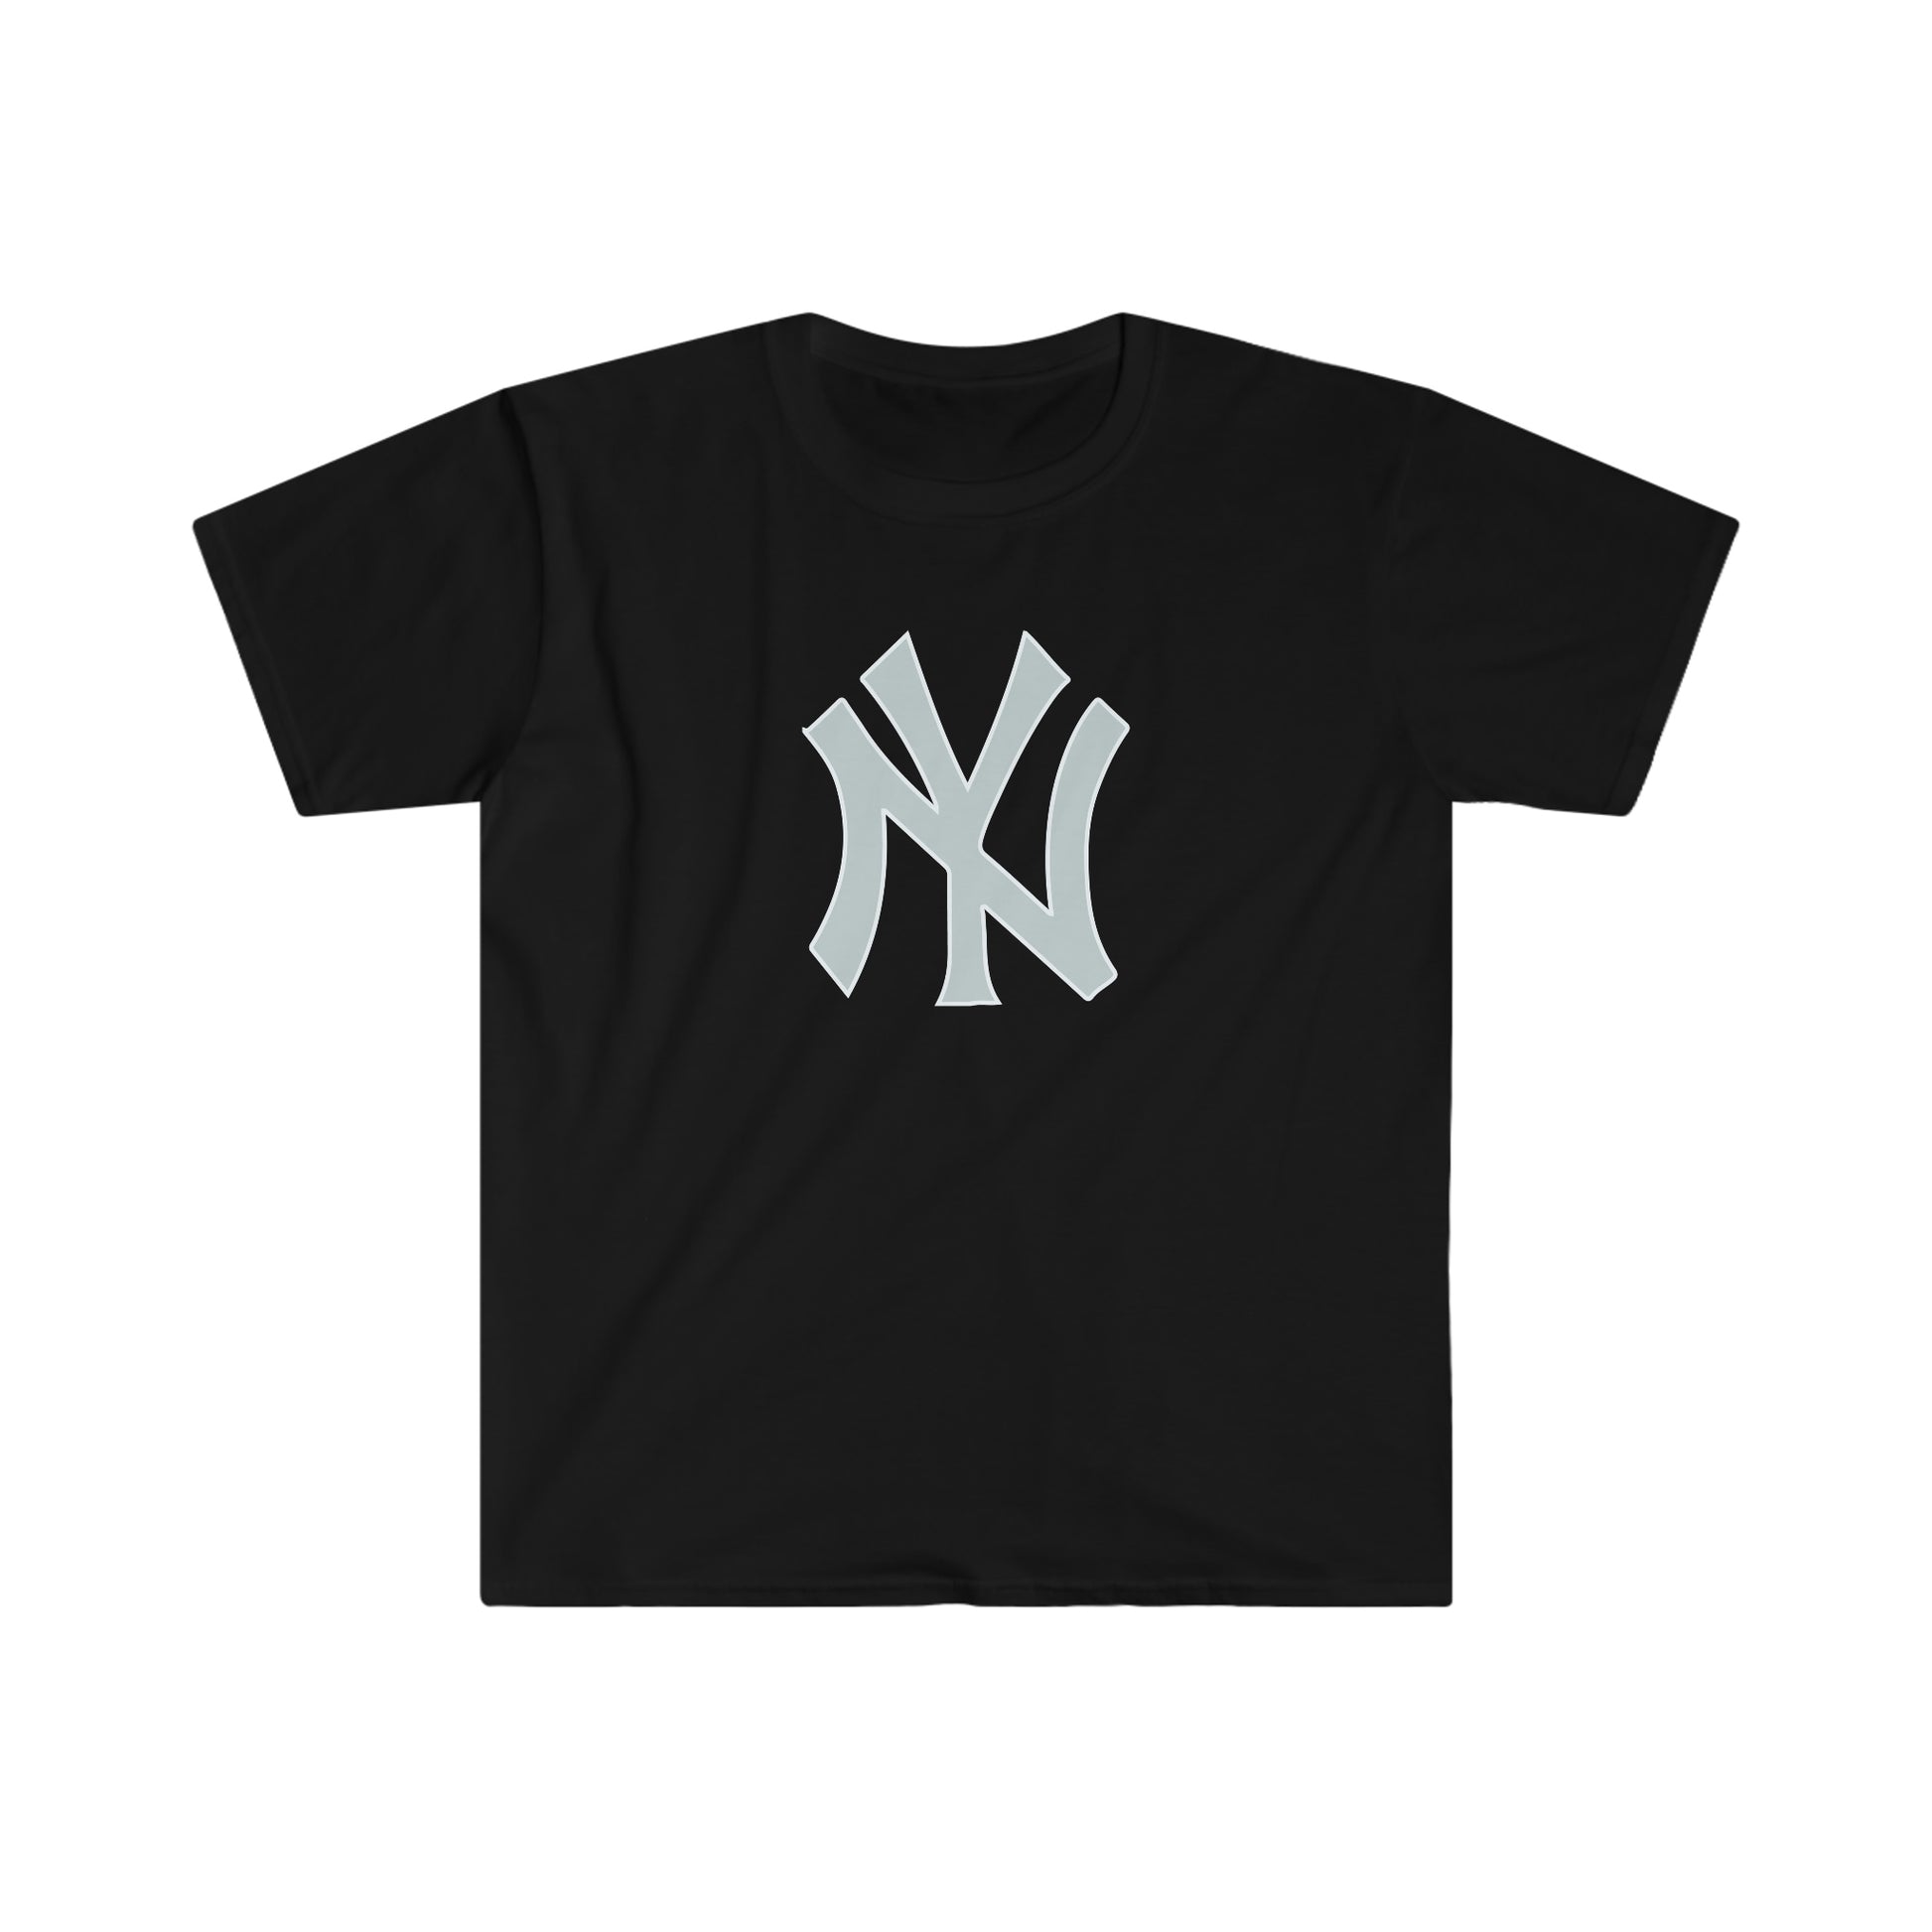 Anthony Rizzo NEW YORK YANKEES T-SHIRT NAVY OR GRAY FREE SHIPPING